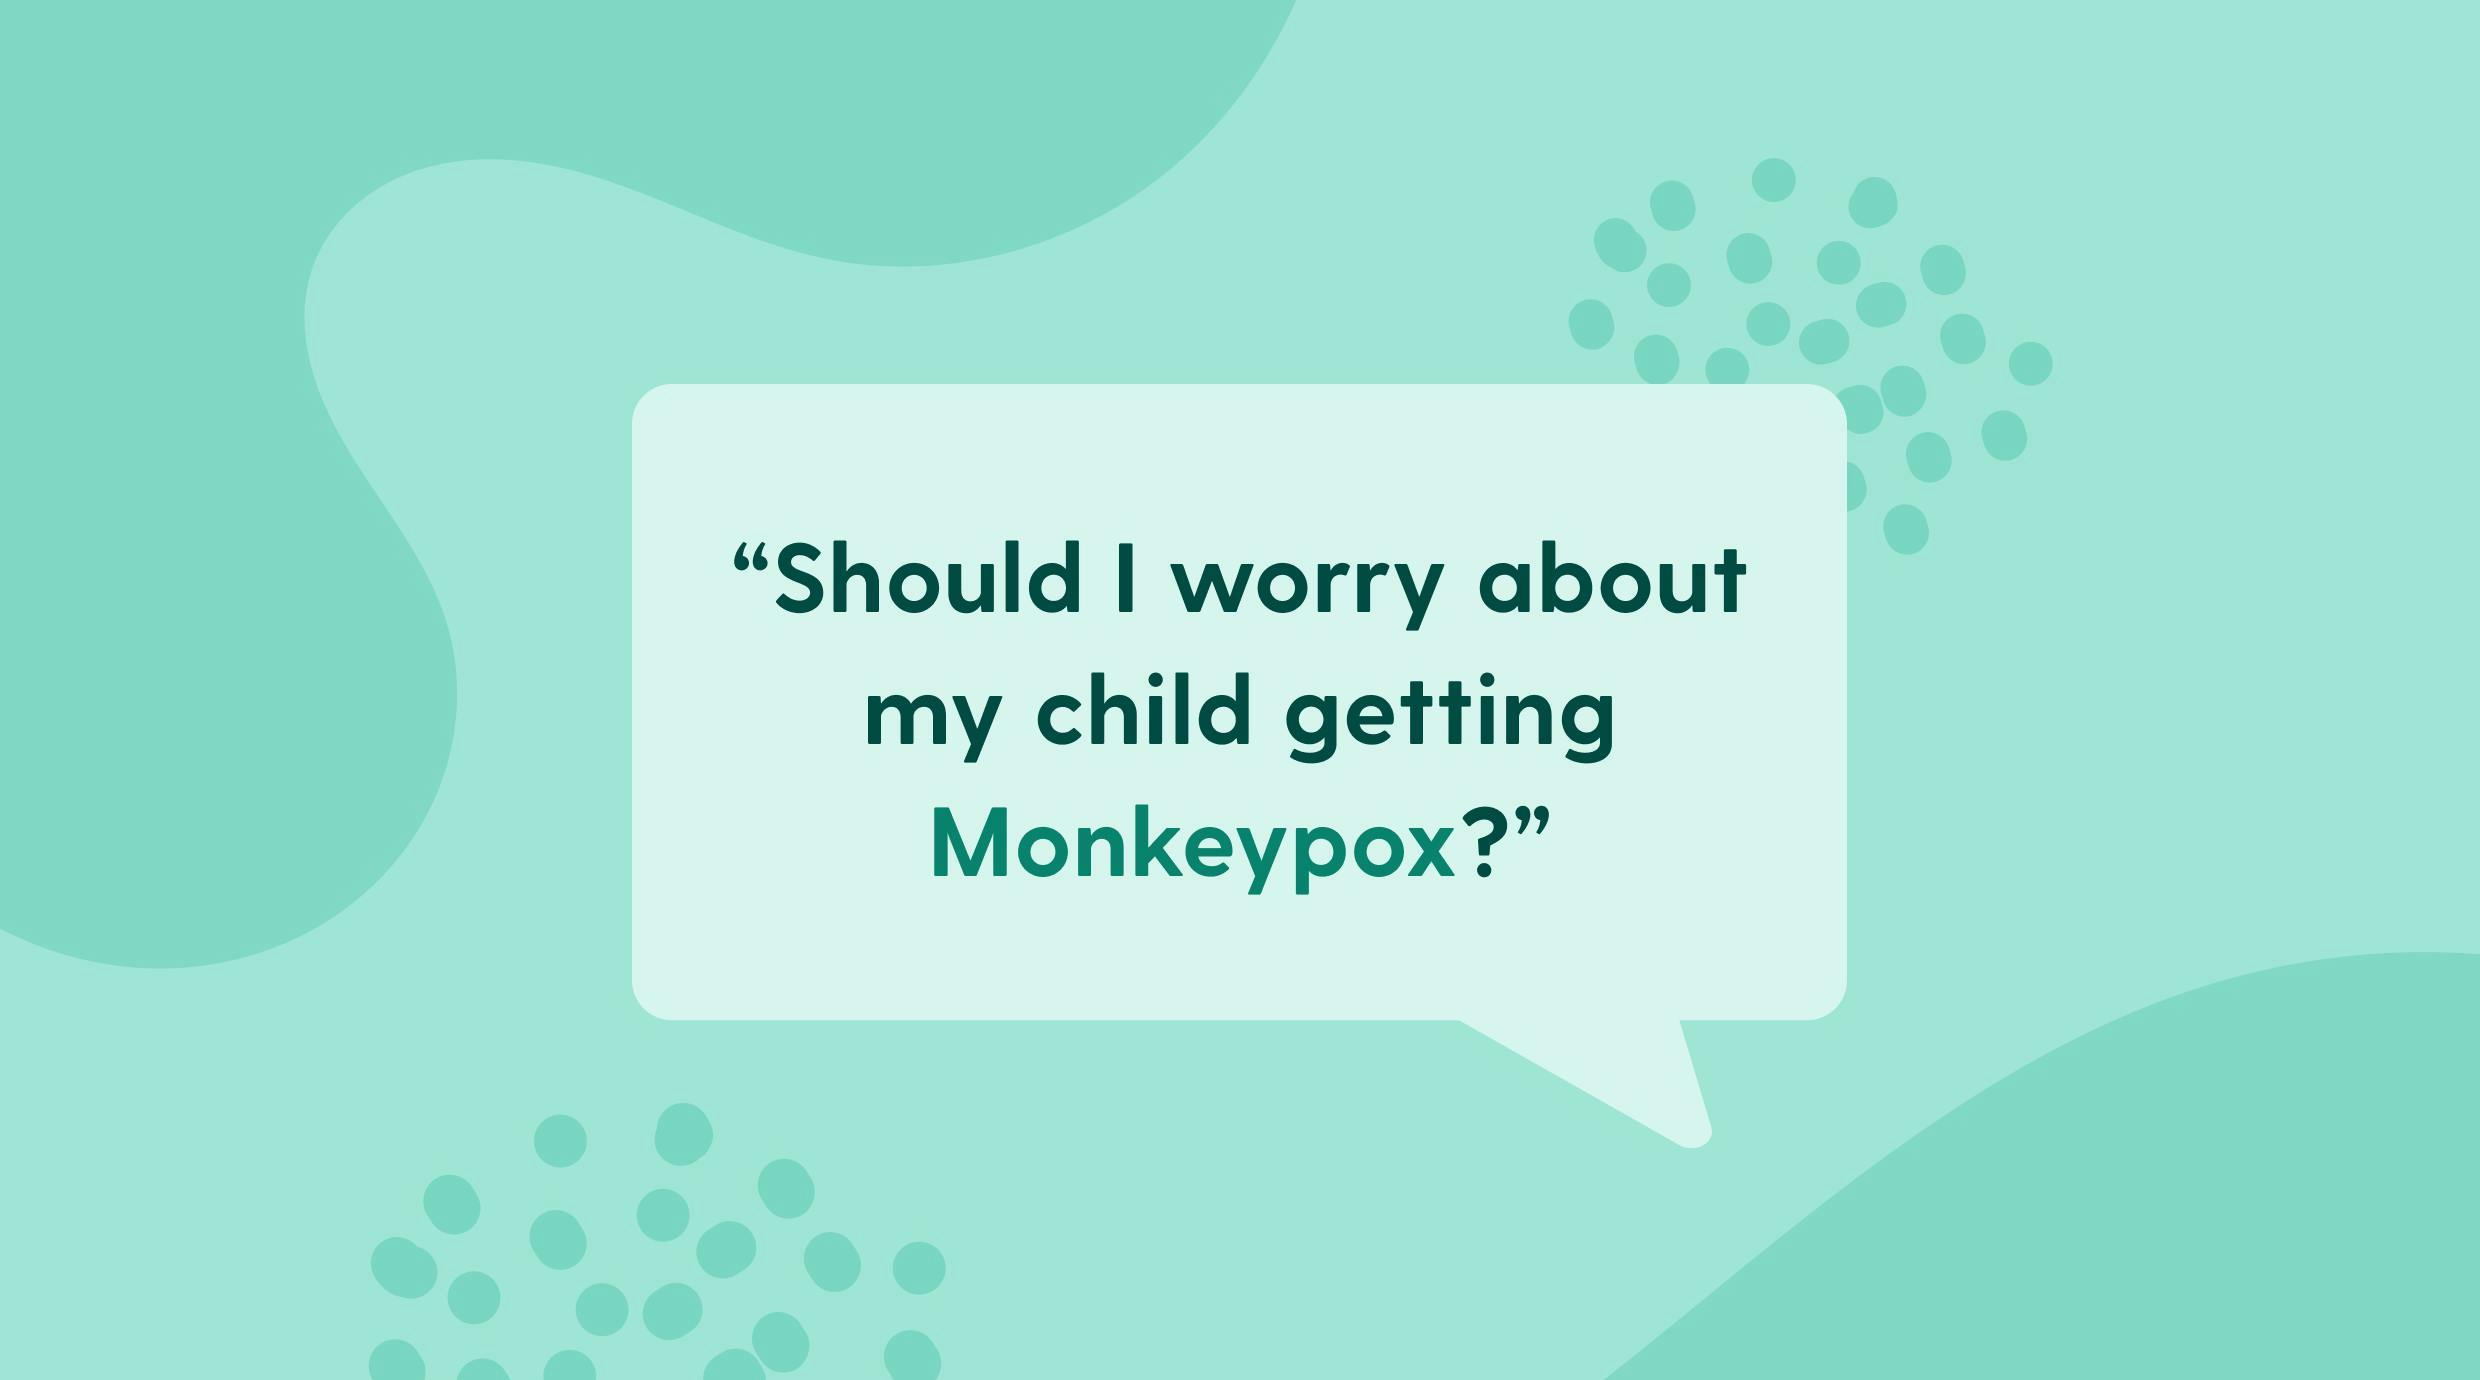 Should I worry about my child getting Monkeypox?